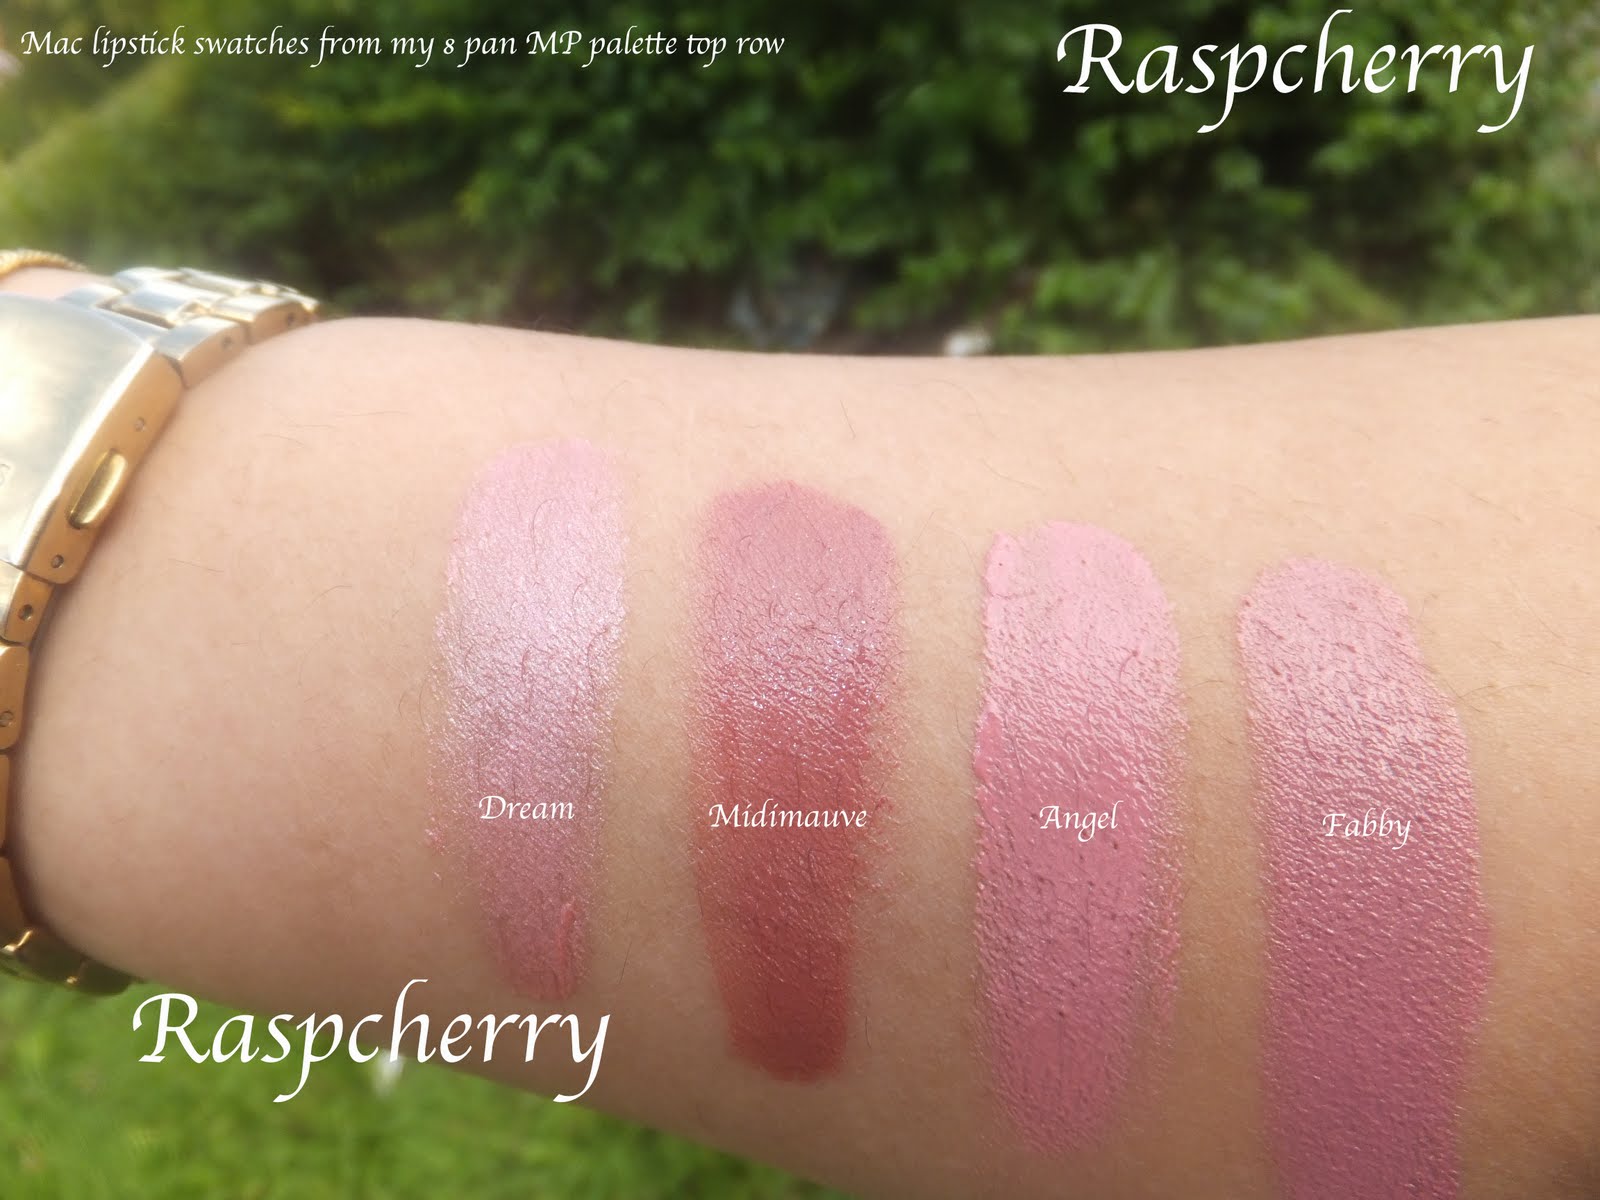 A Beauty And Lifestyle Blog From Raspcherry Mac Lipstick Collection And Swatches